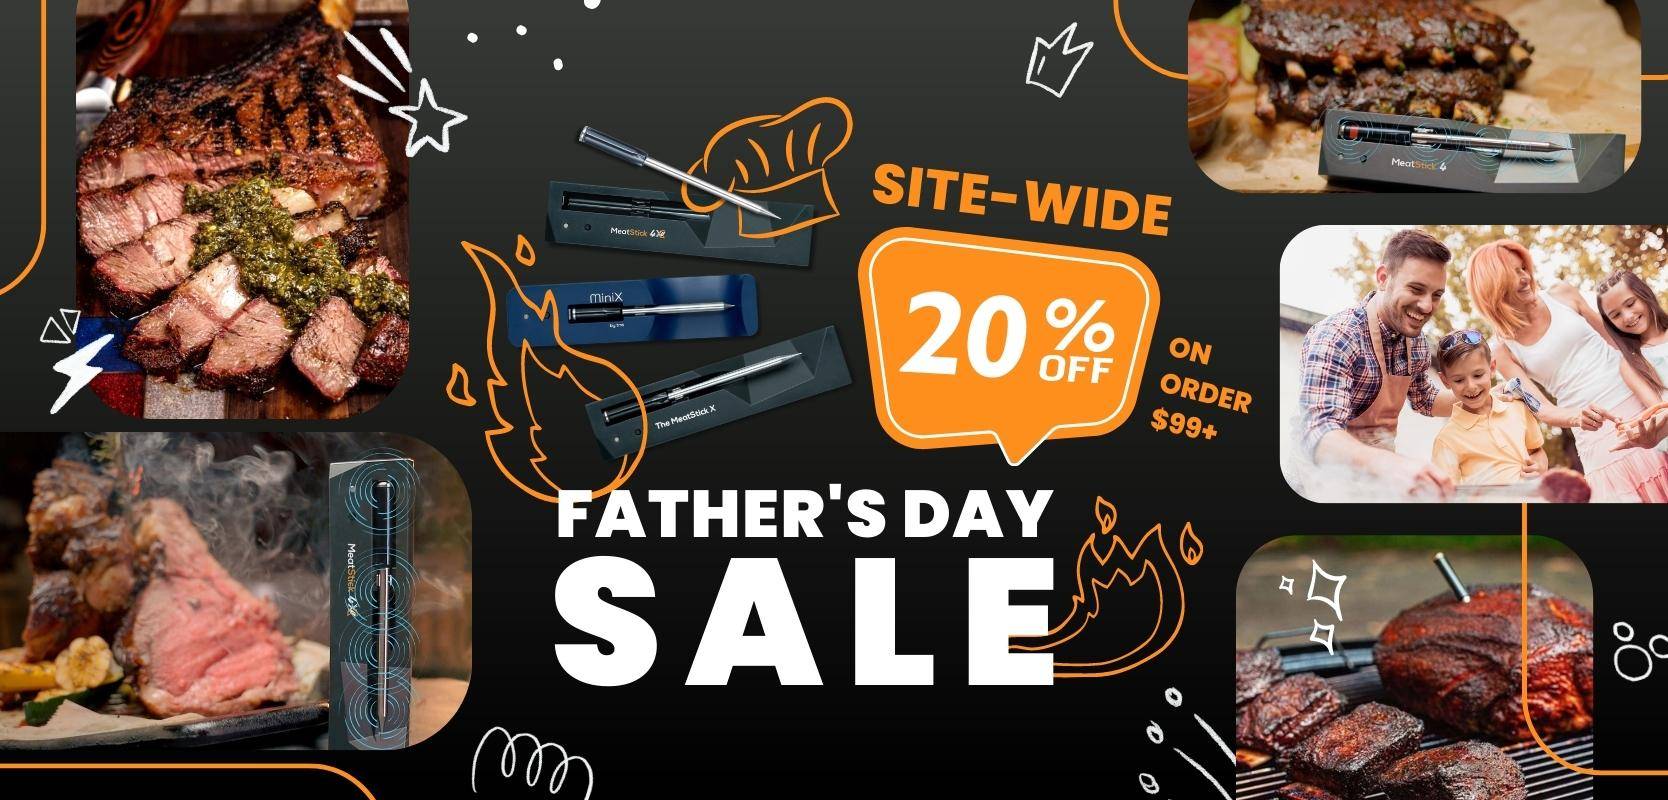 The MeatStick Wireless Meat Thermometer Father's Day Sale with Site-Wide 20% Off